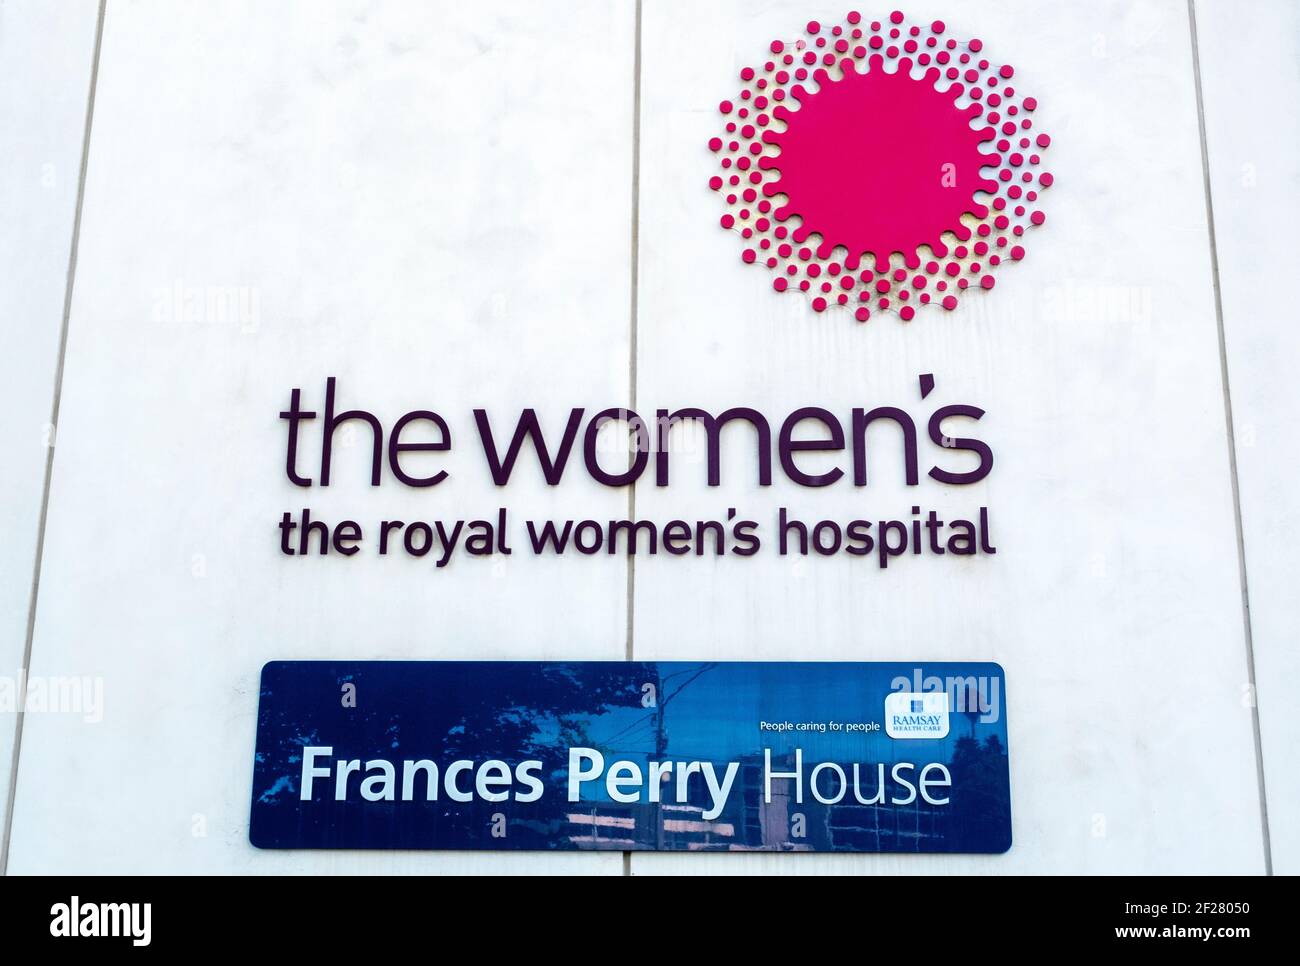 Signage for the Royal Women's Hospital, Frances Perry House, Melbourne, Victoria, Australia Stock Photo